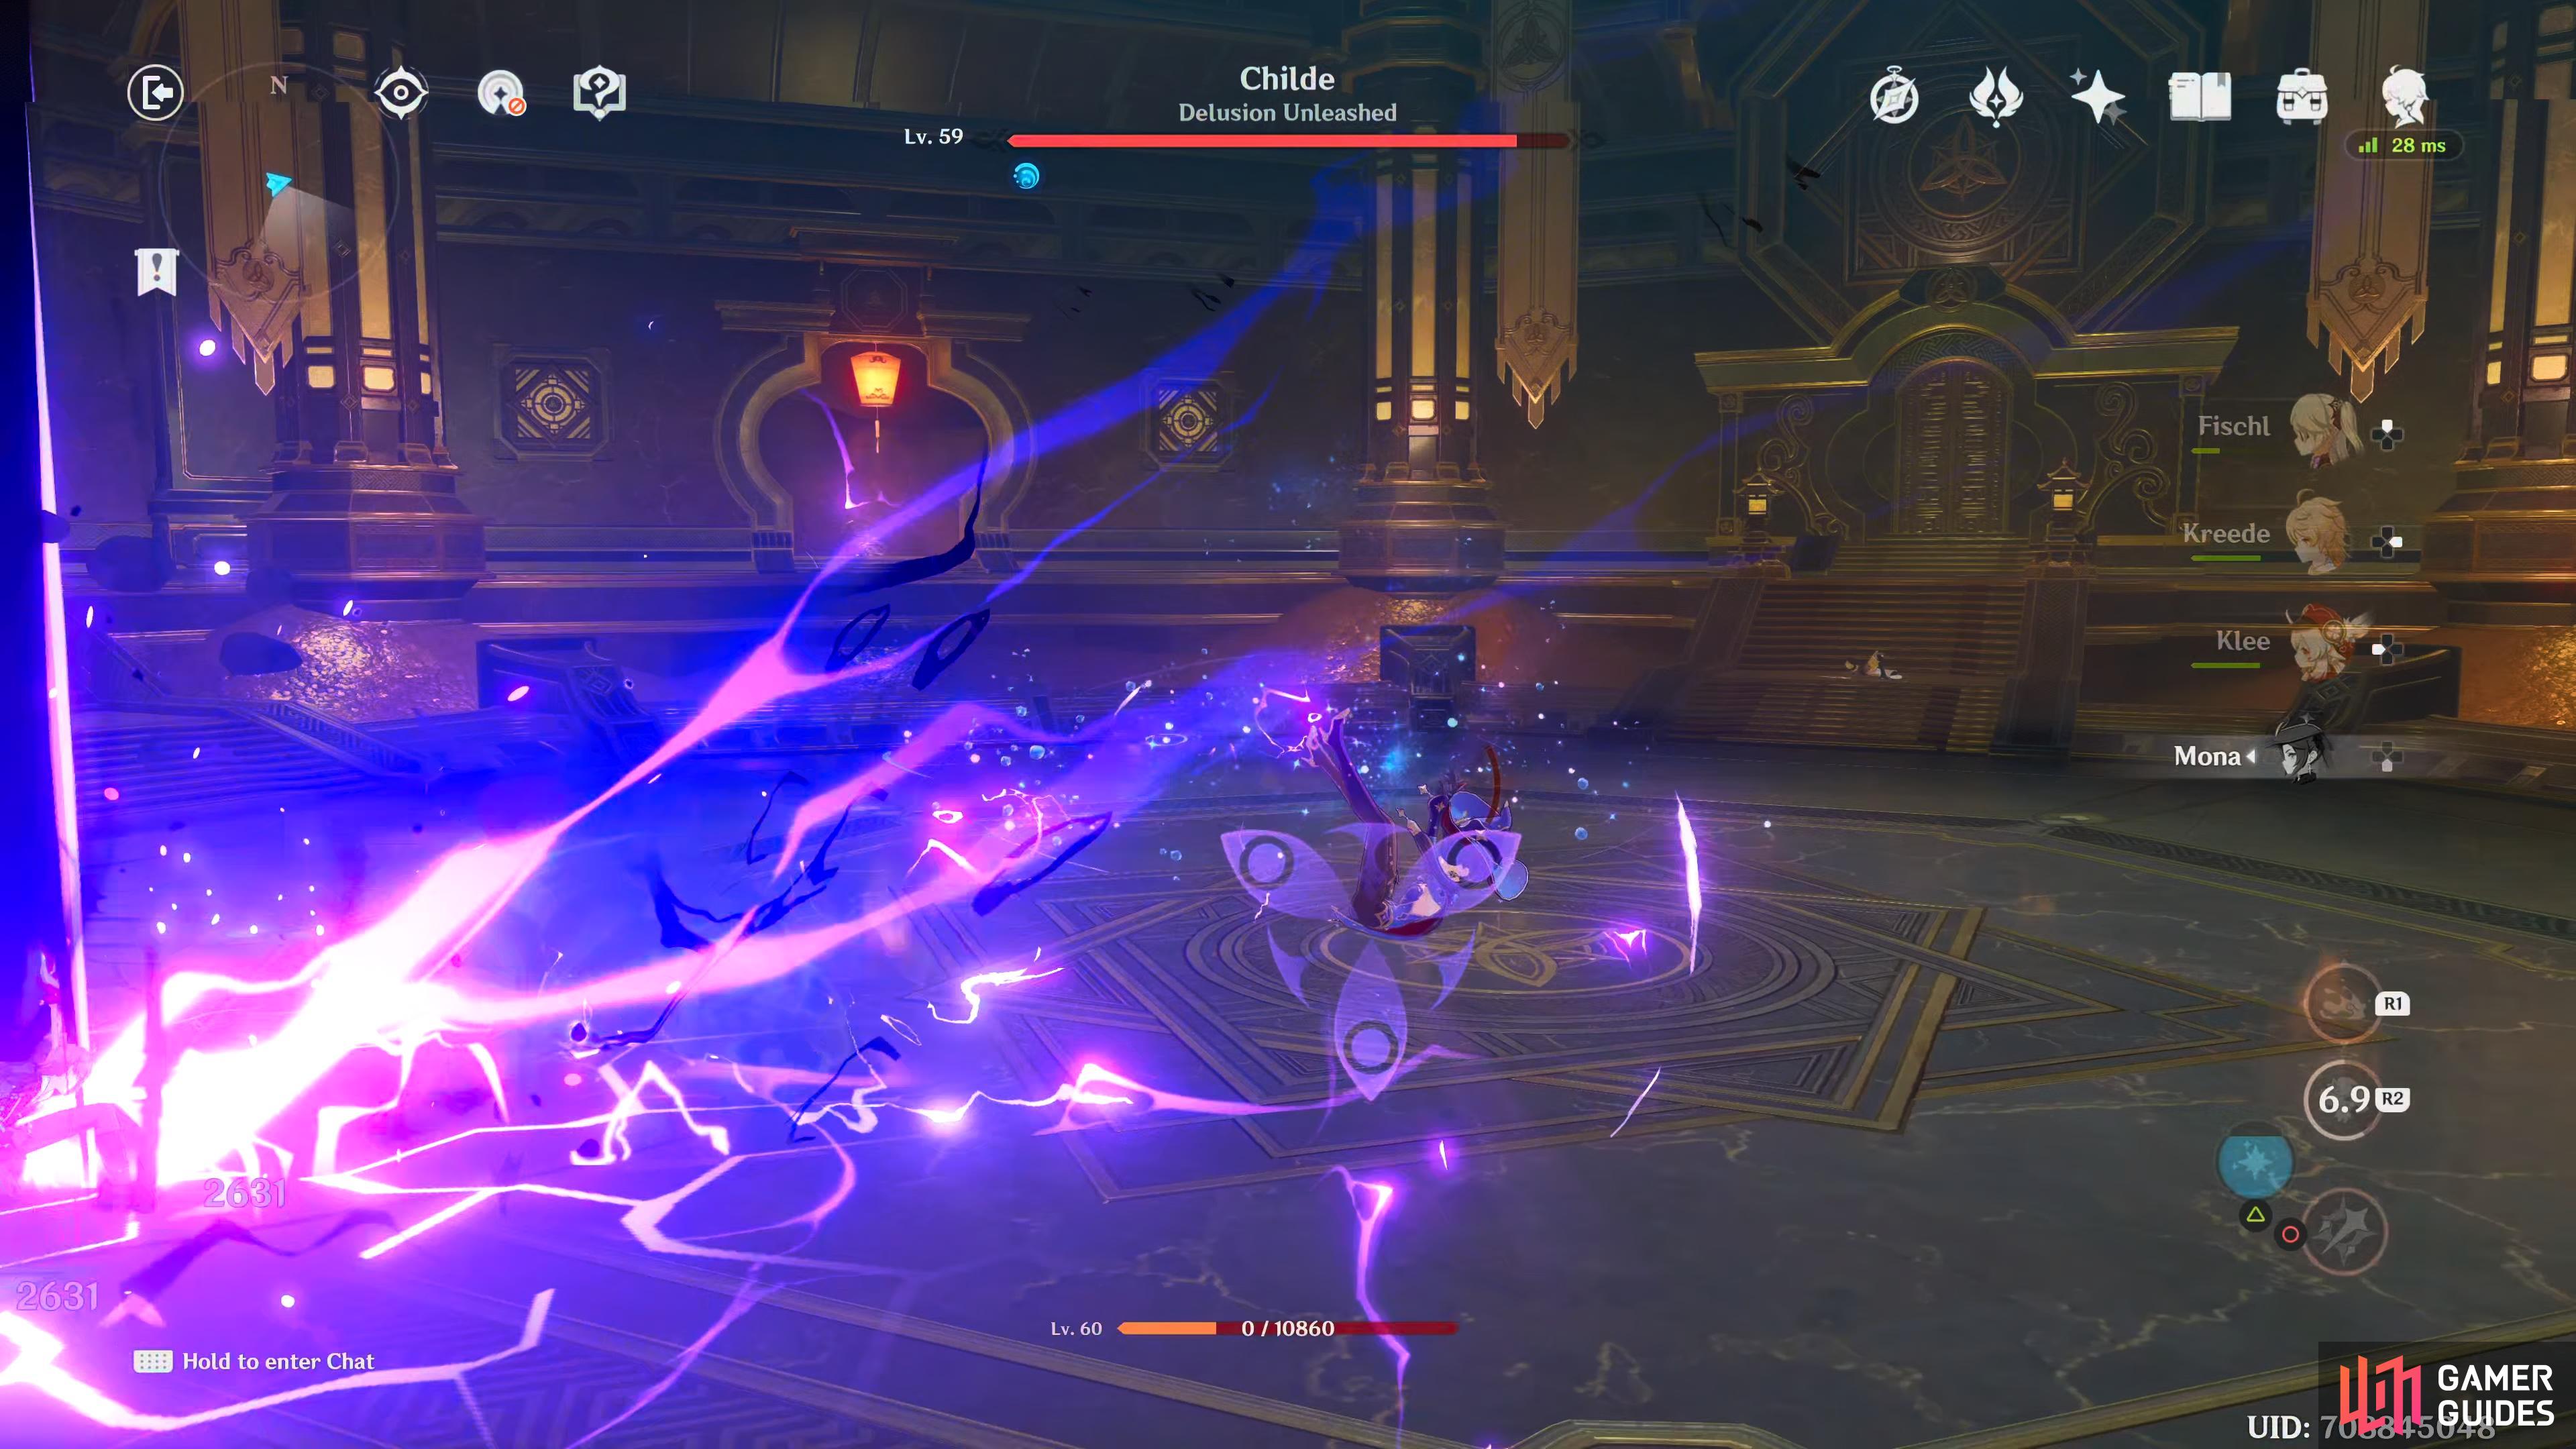  and then crash down on you, use Elemental Bursts with longer animations to make you invulnerable to it.